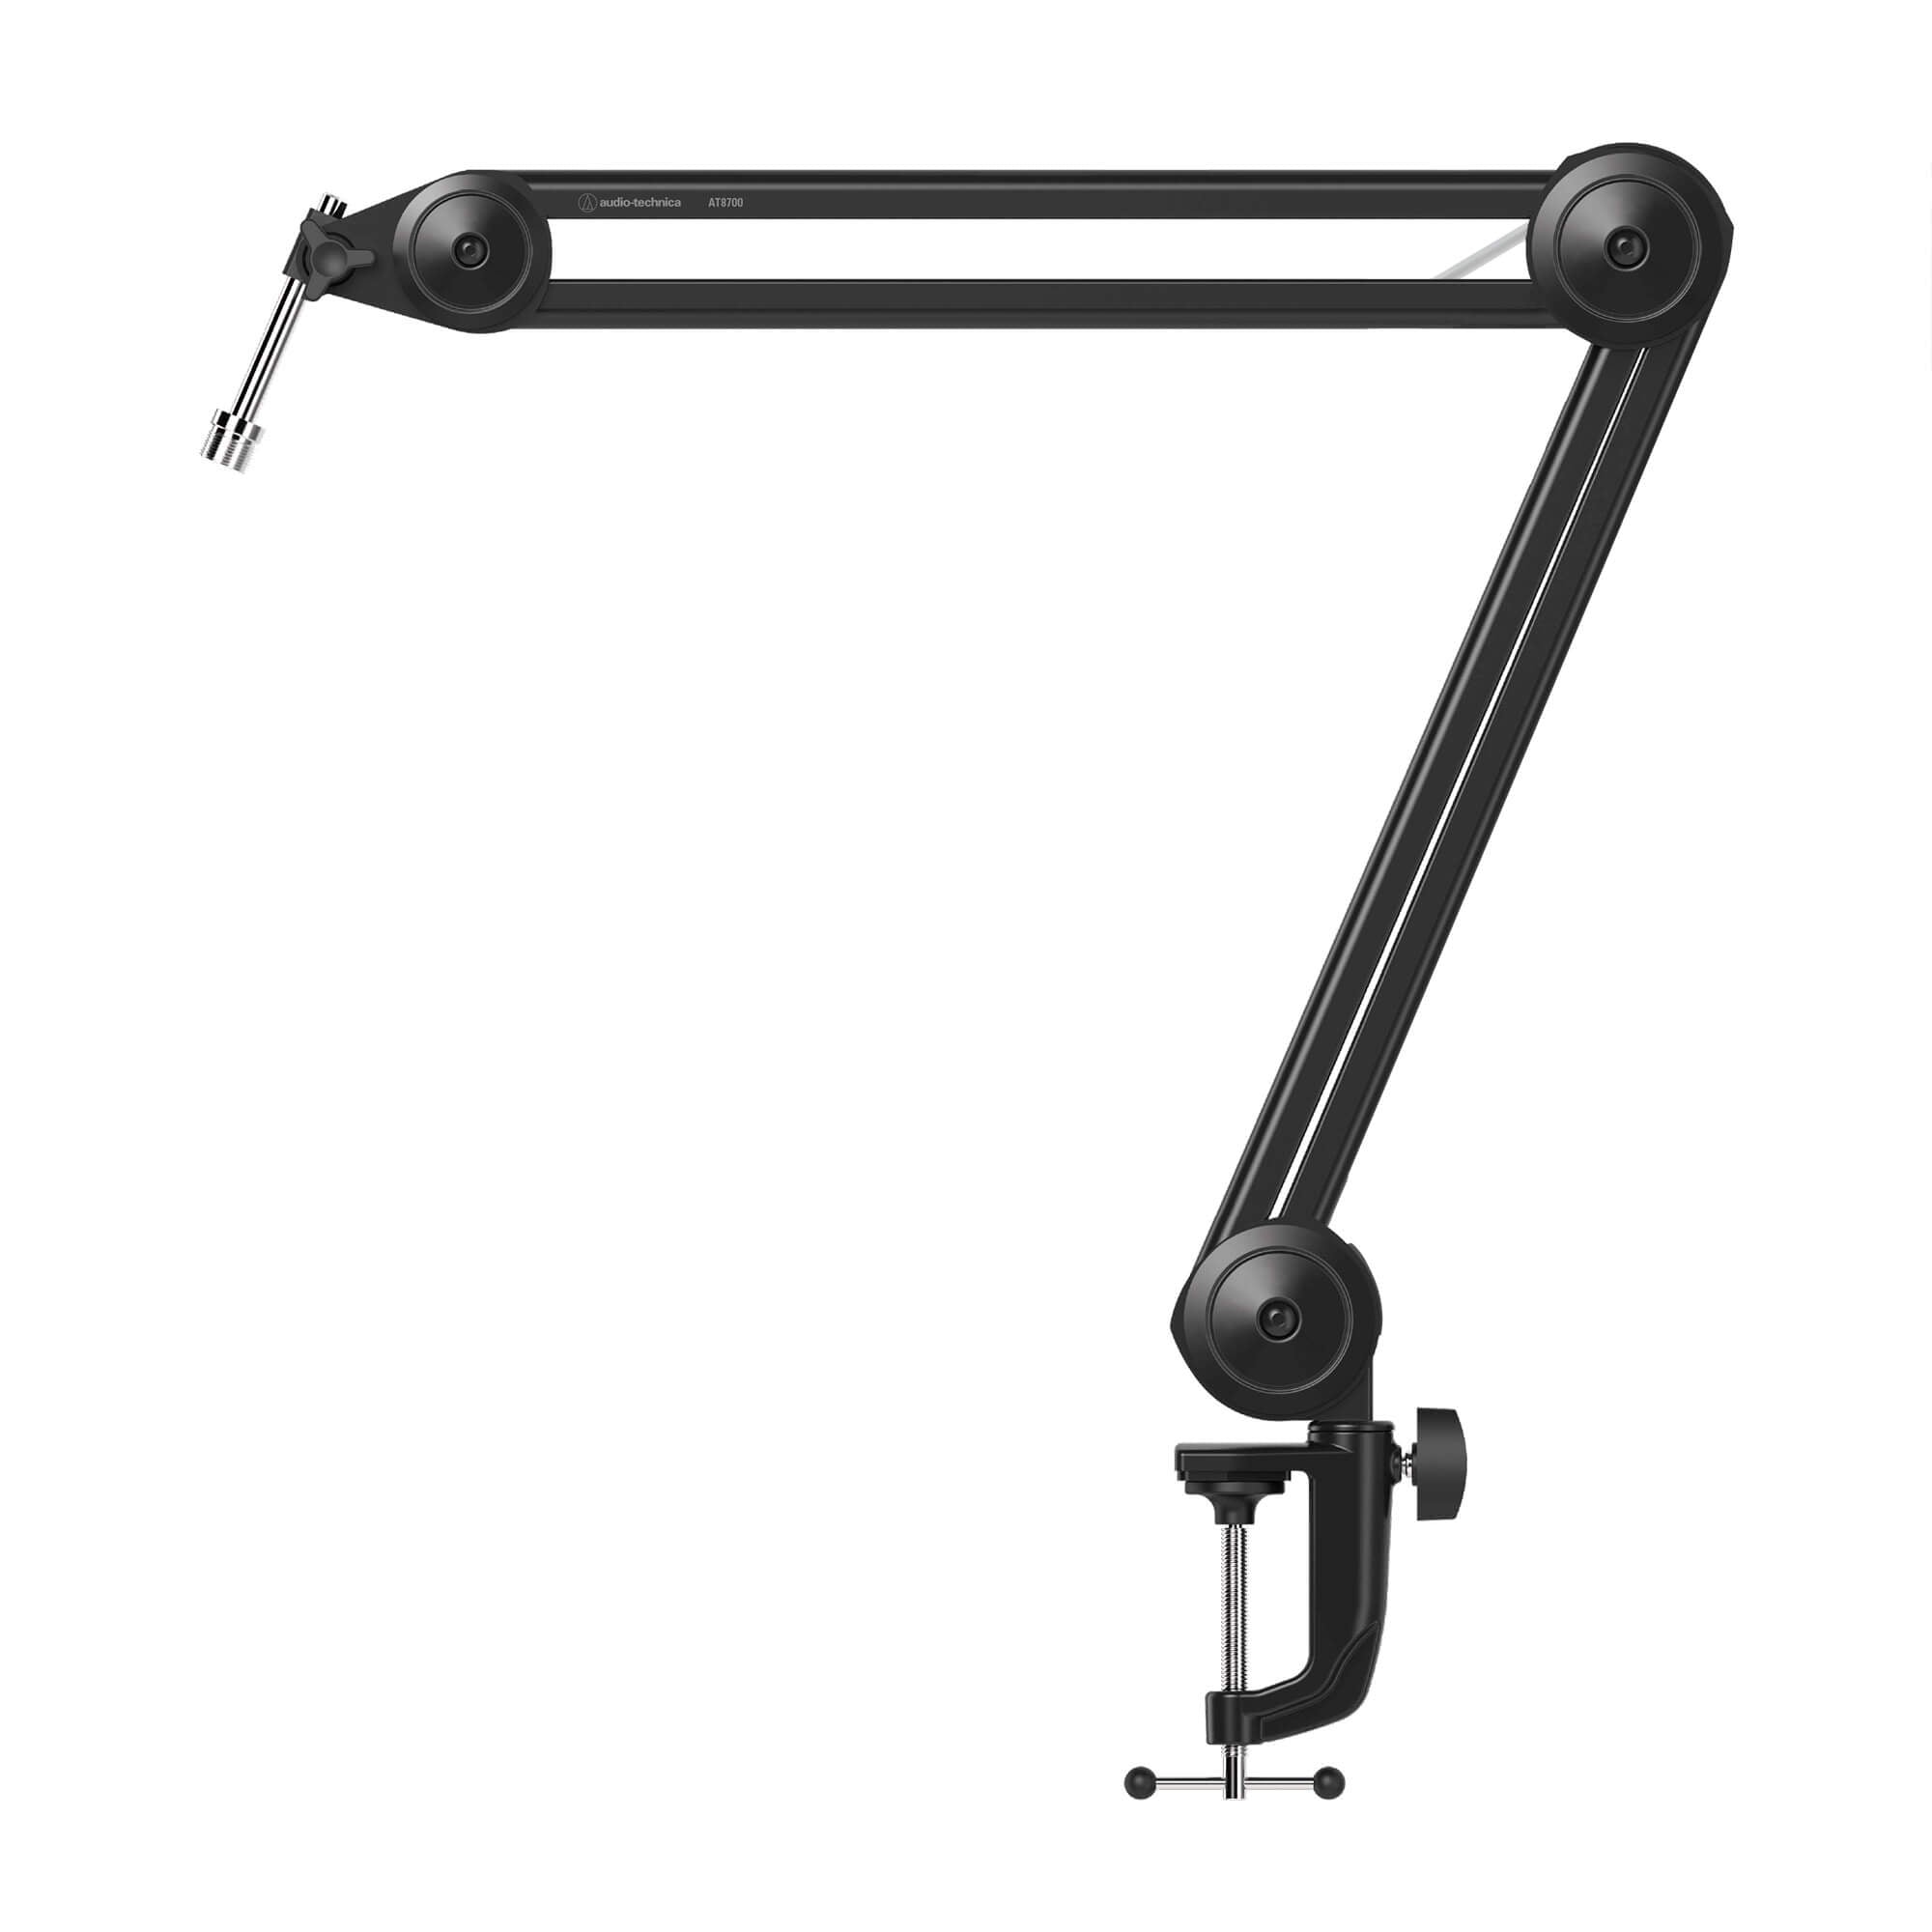 Audio-Technica AT8700 - Microphone Boom Arm with Included Desk Clamp